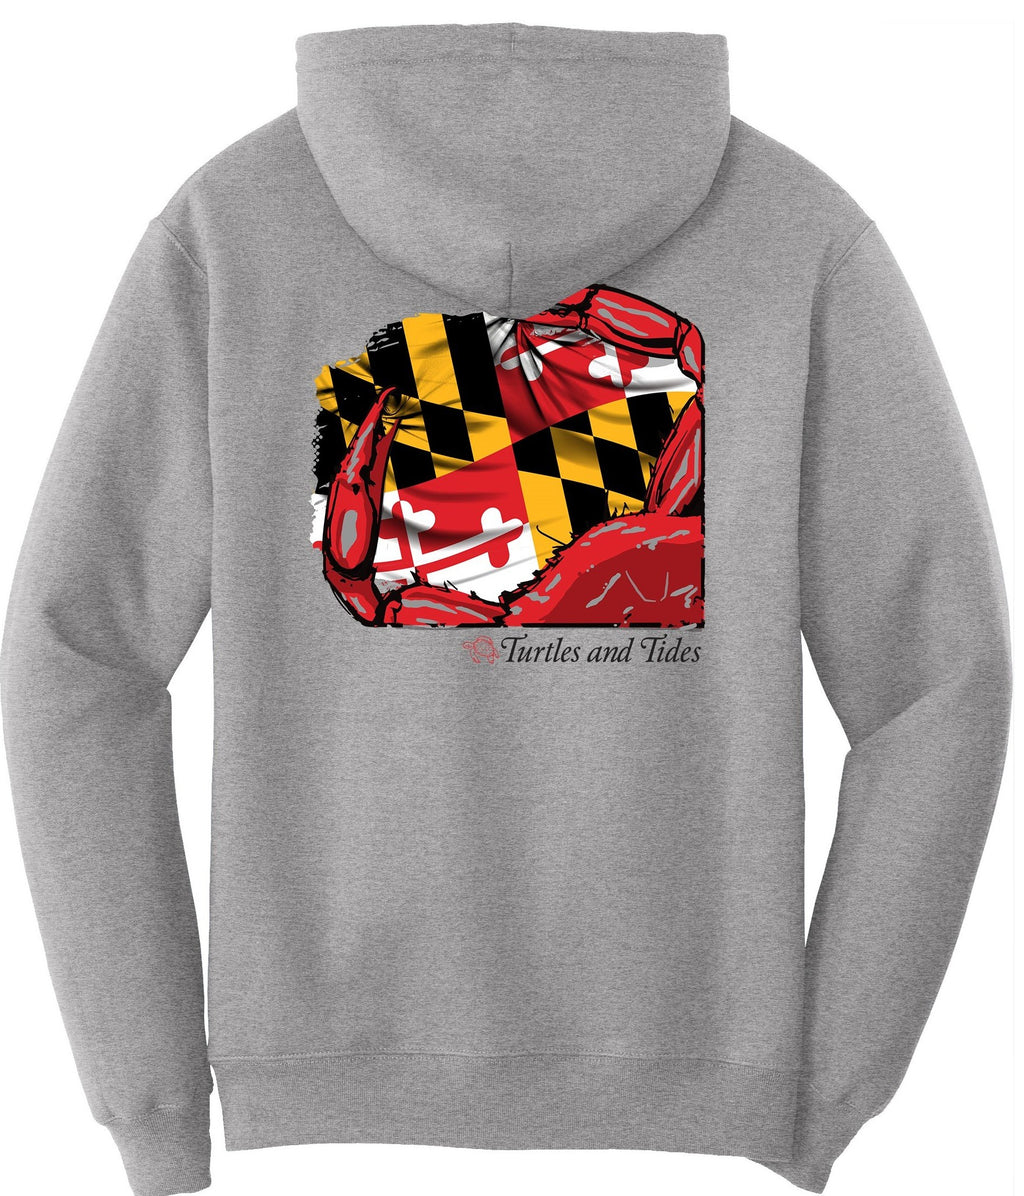 NEW!!! Crab-Spangled Banner - Hooded Fleece - Turtles and Tides 